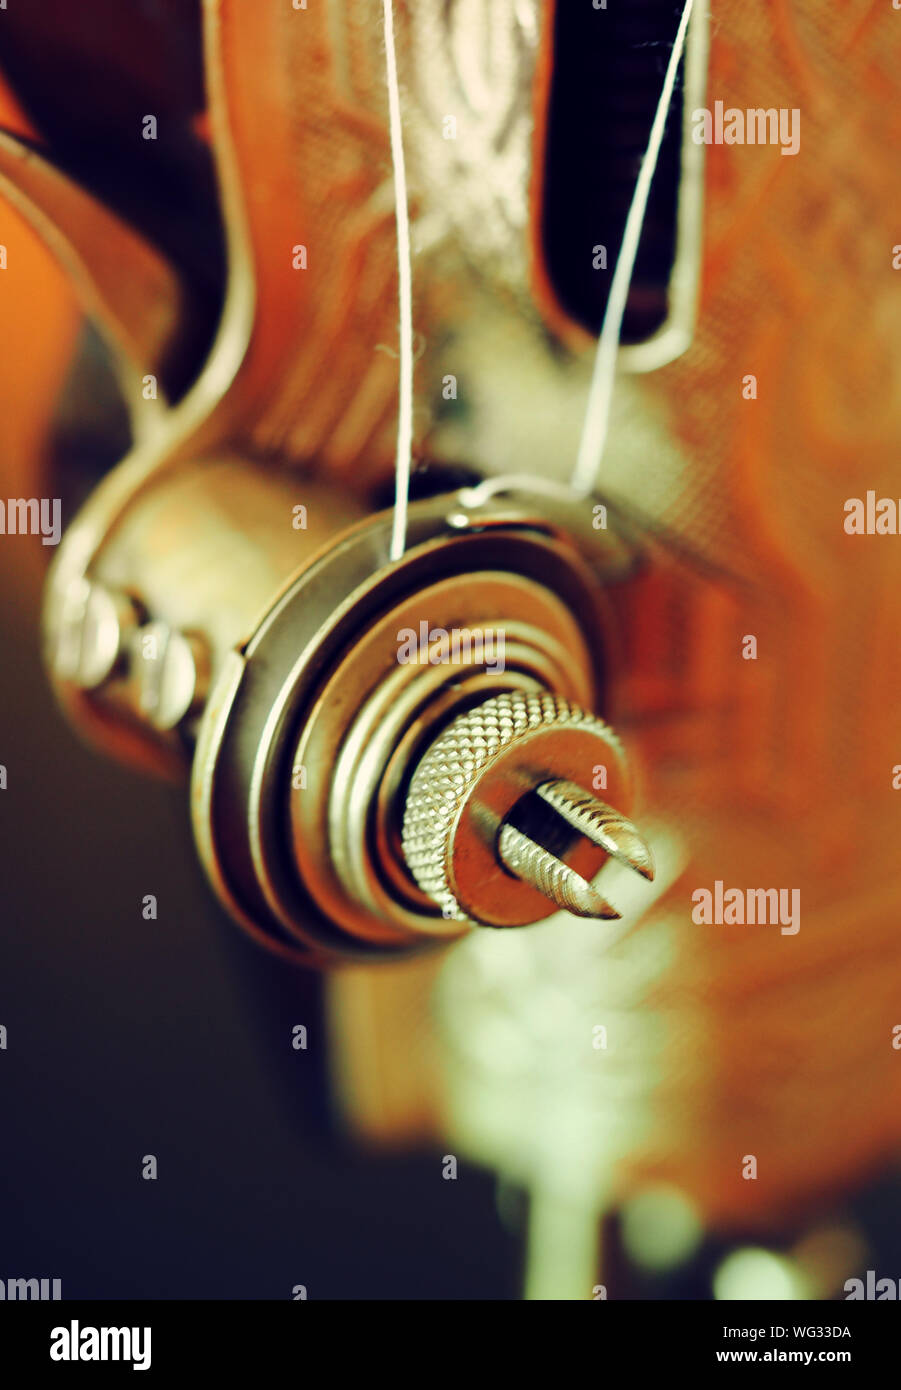 Cropped Image Of Old Sewing Machine Stock Photo